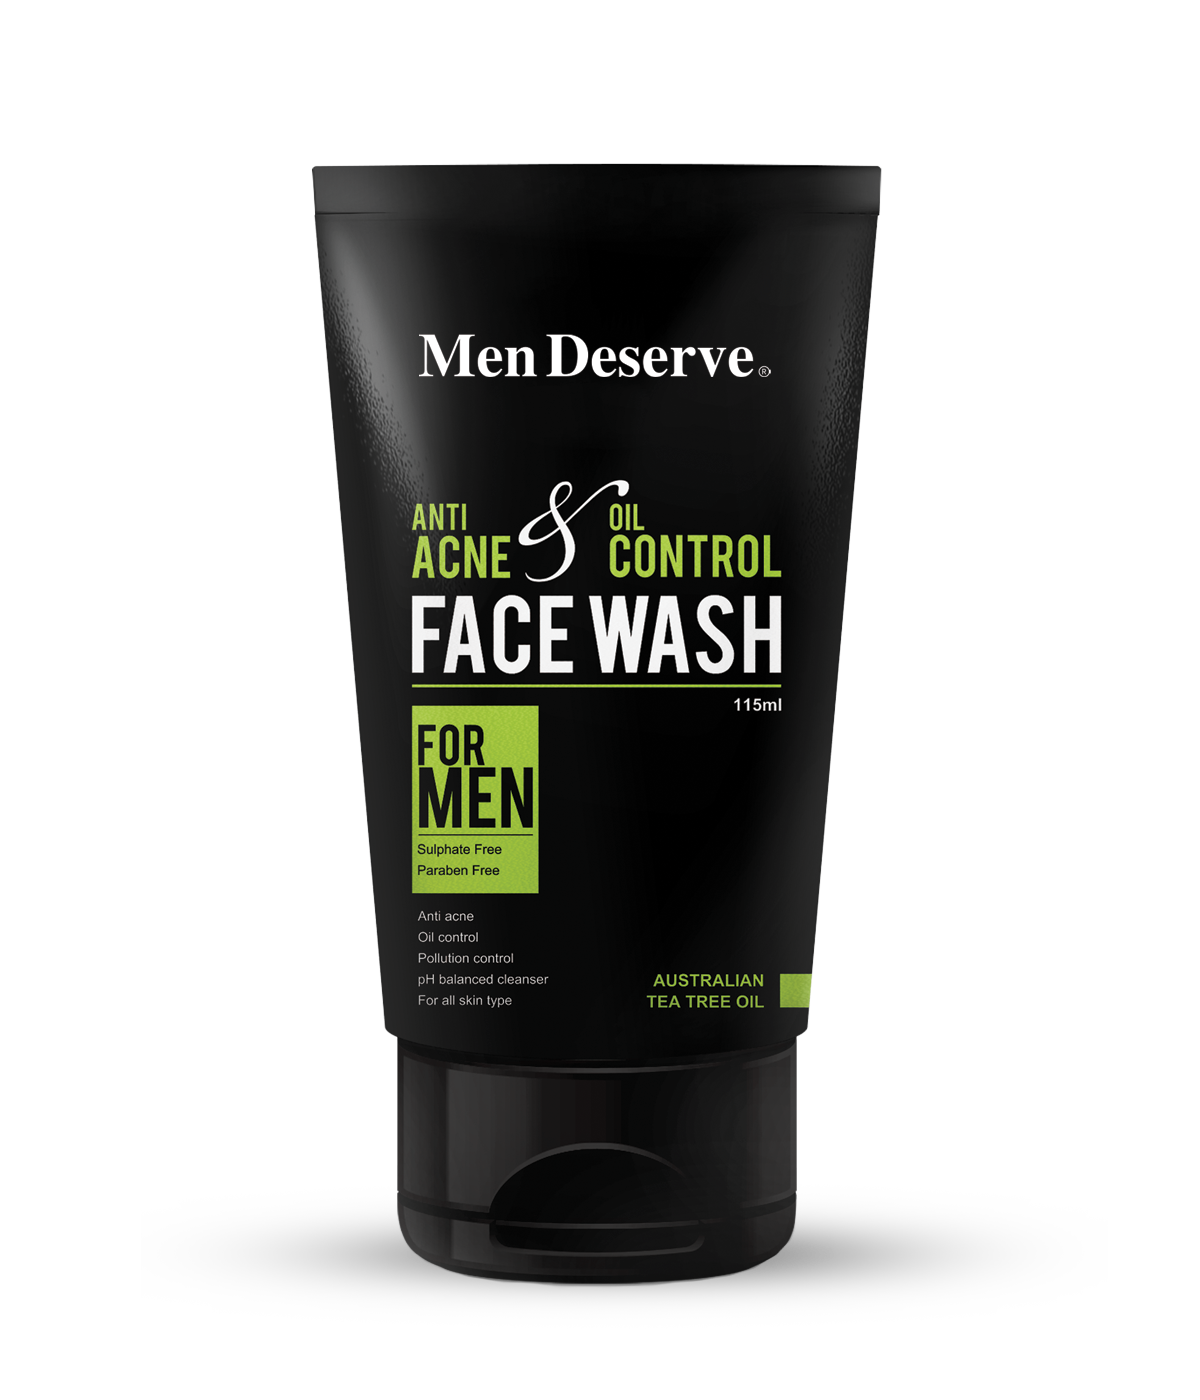 Anti Acne and Oil Control Face Wash